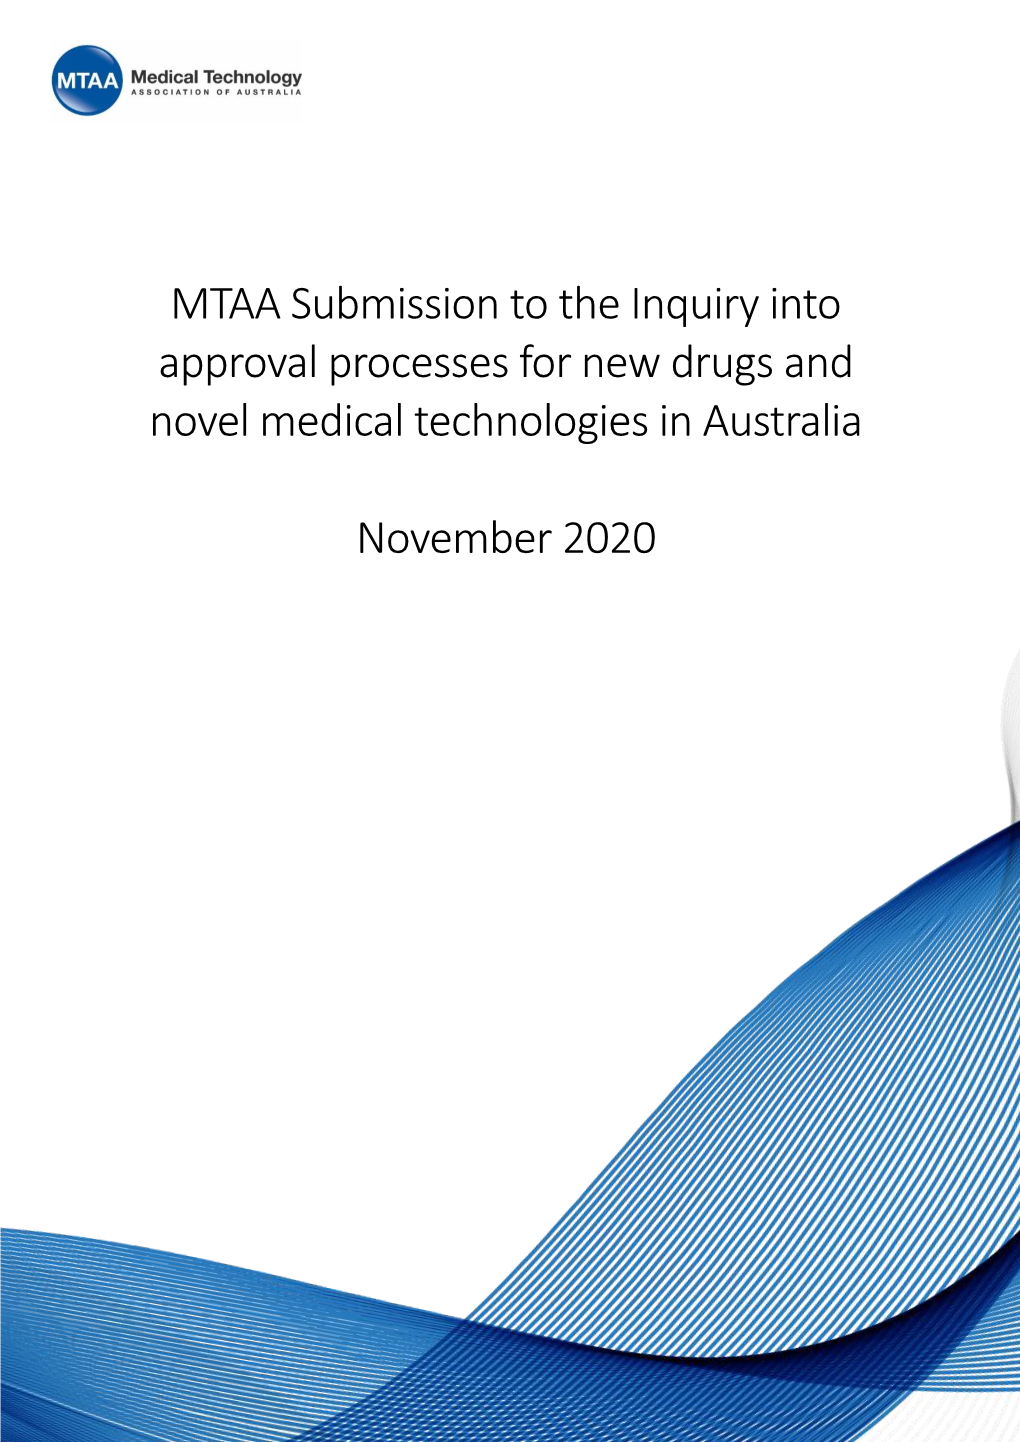 MTAA Submission to the Inquiry Into Approval Processes for New Drugs and Novel Medical Technologies in Australia November 2020